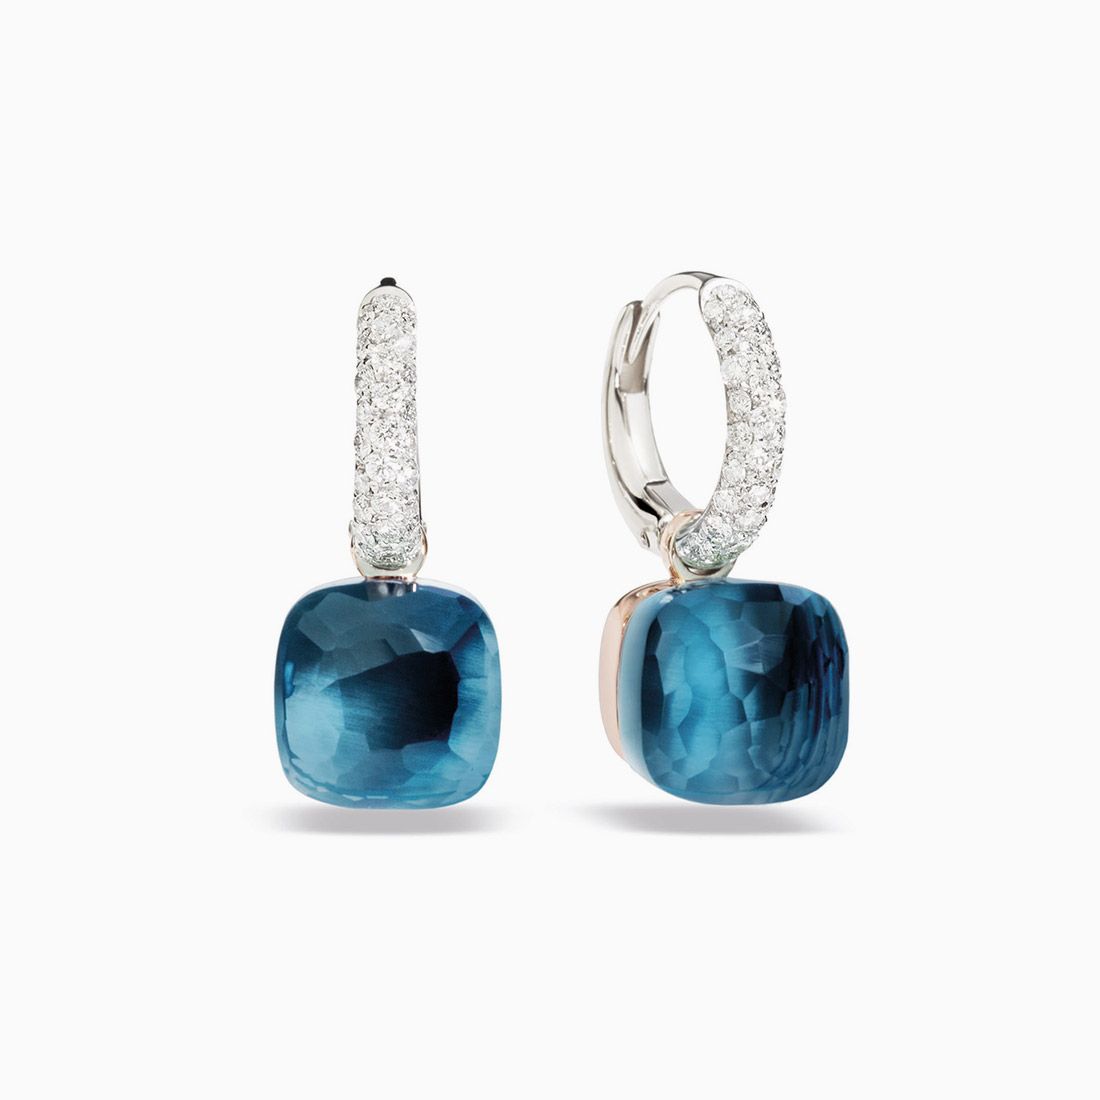 Pomellato Earrings with Topaze and Diamonds 